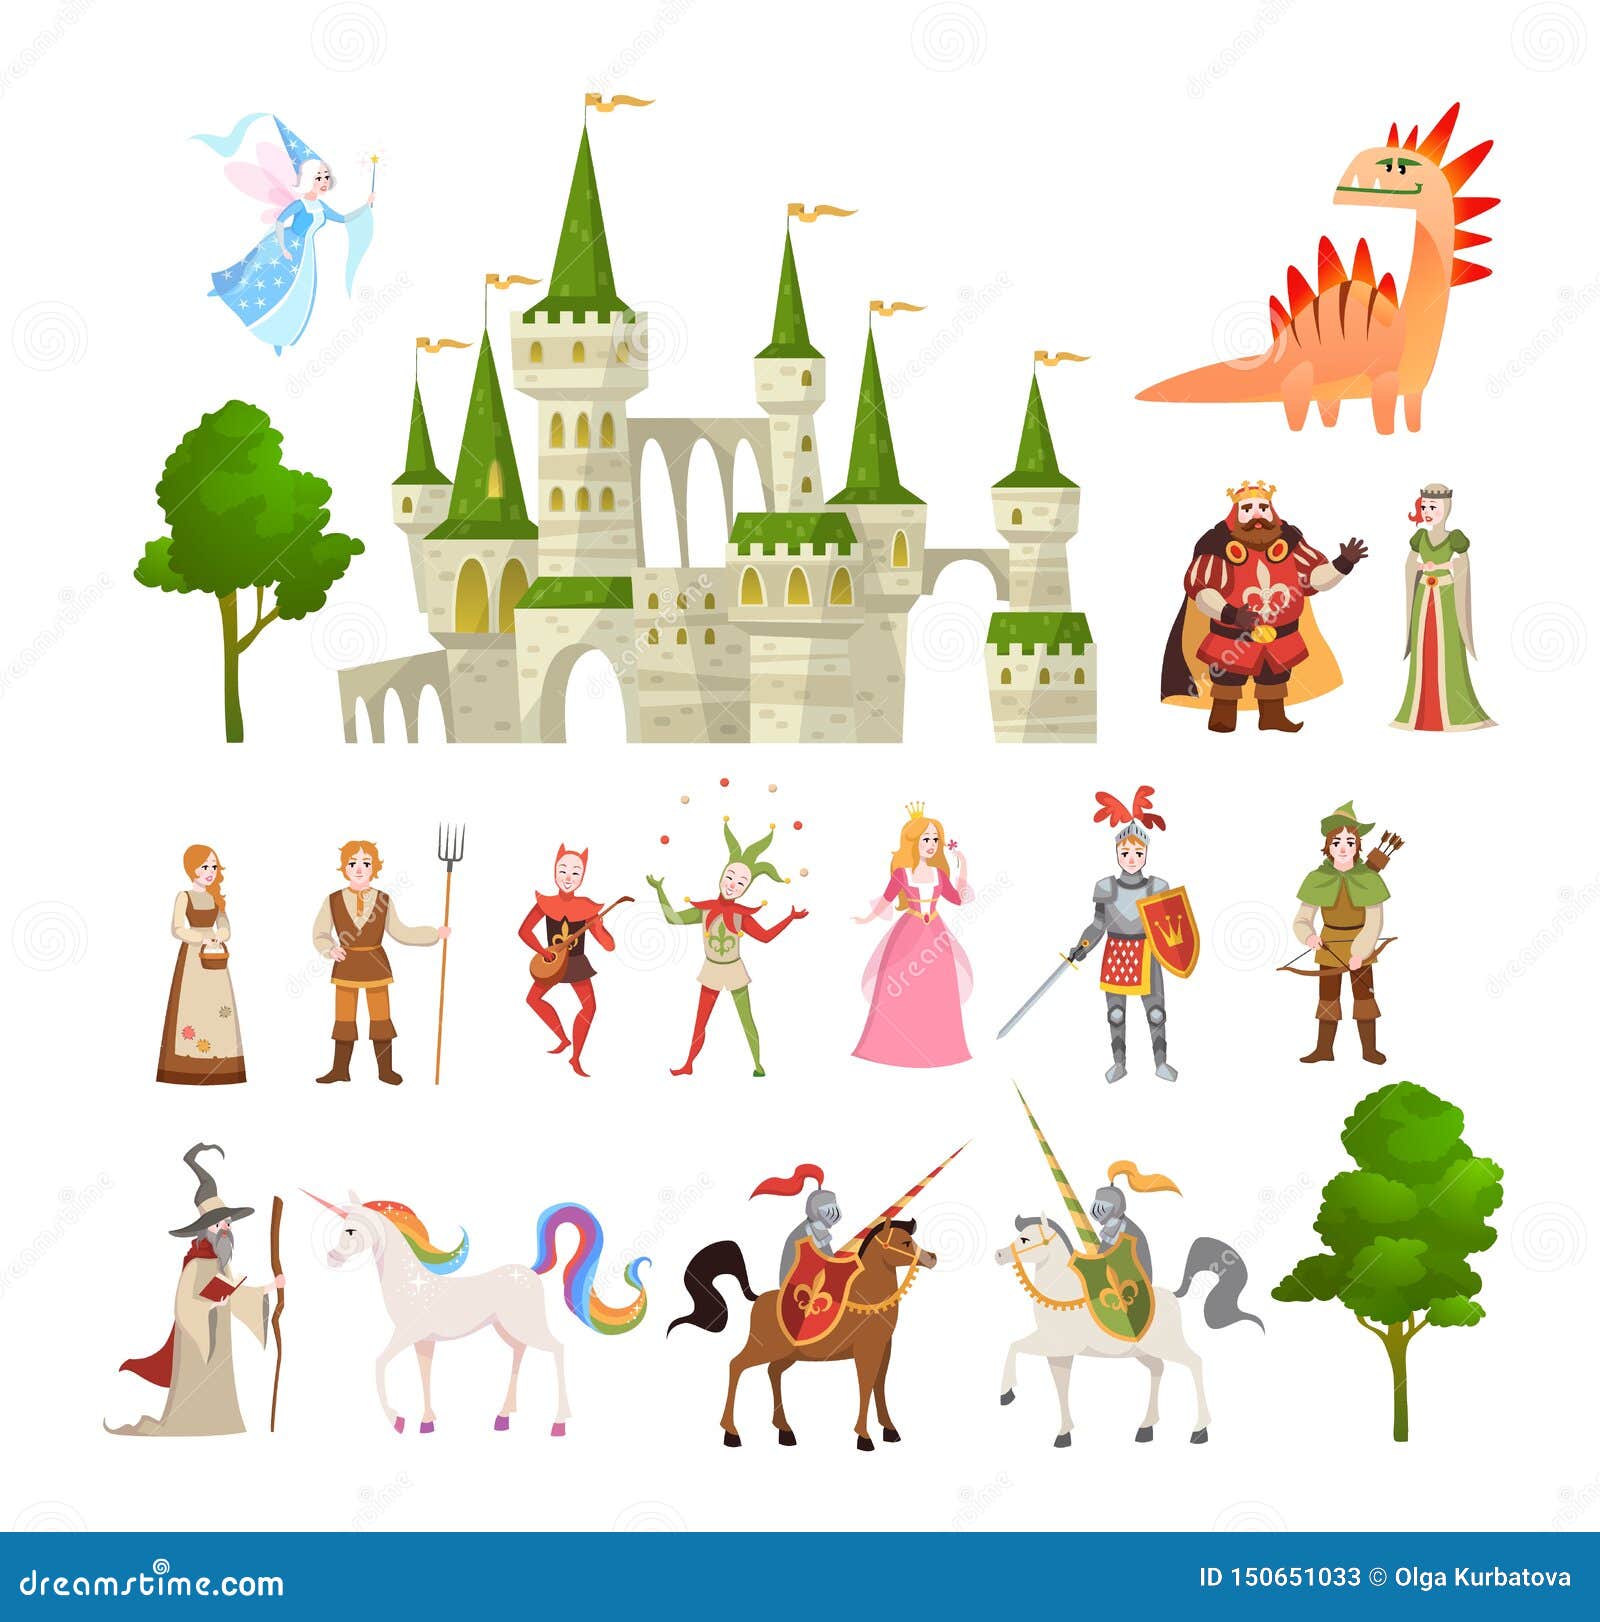 fairytale characters. fantasy medieval magic dragon, unicorn, princes and king, royal castle and knight  set